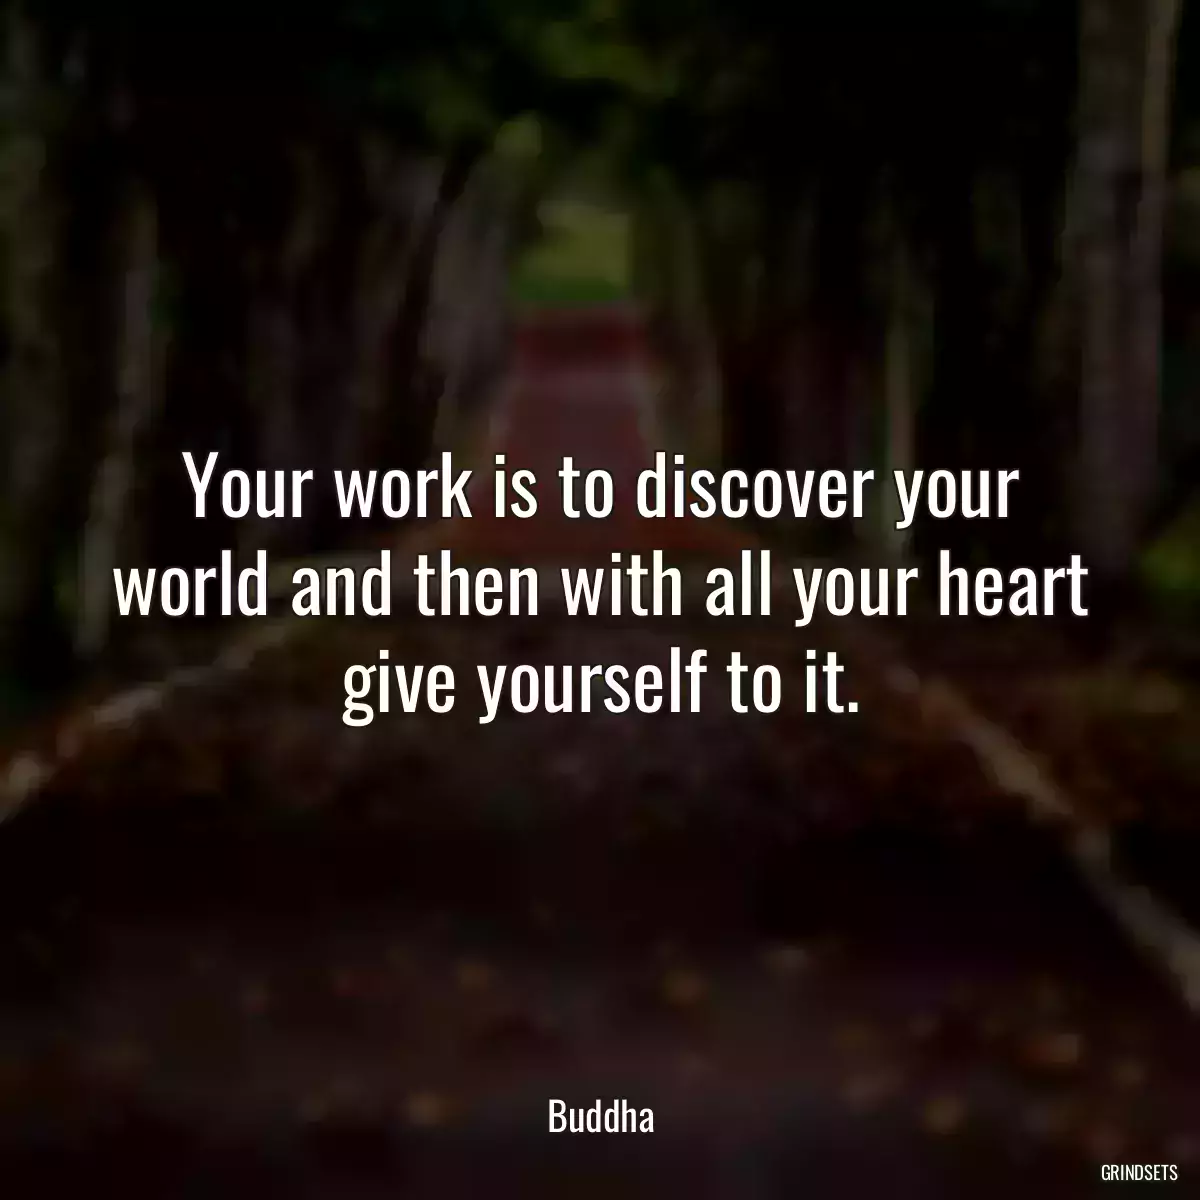 Your work is to discover your world and then with all your heart give yourself to it.